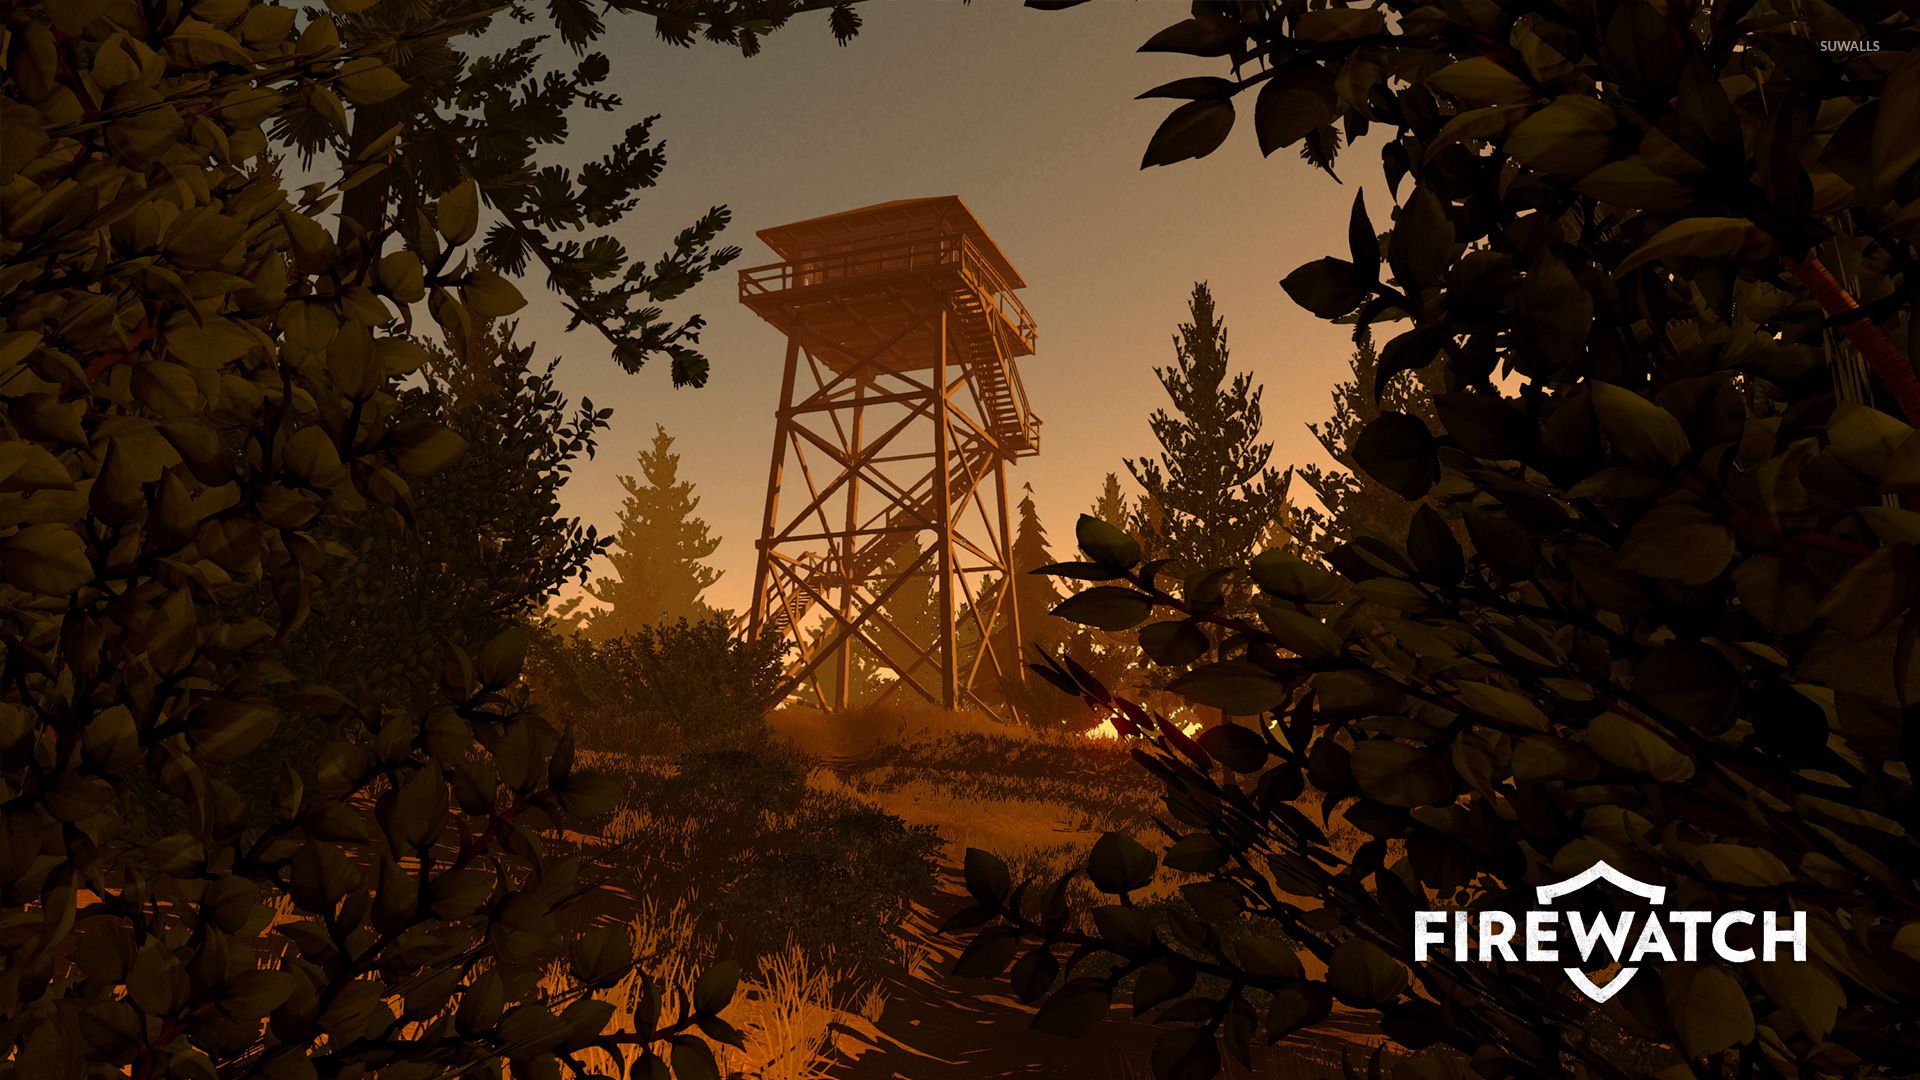 Fire lookout tower seen from the forest wallpaper wallpaper